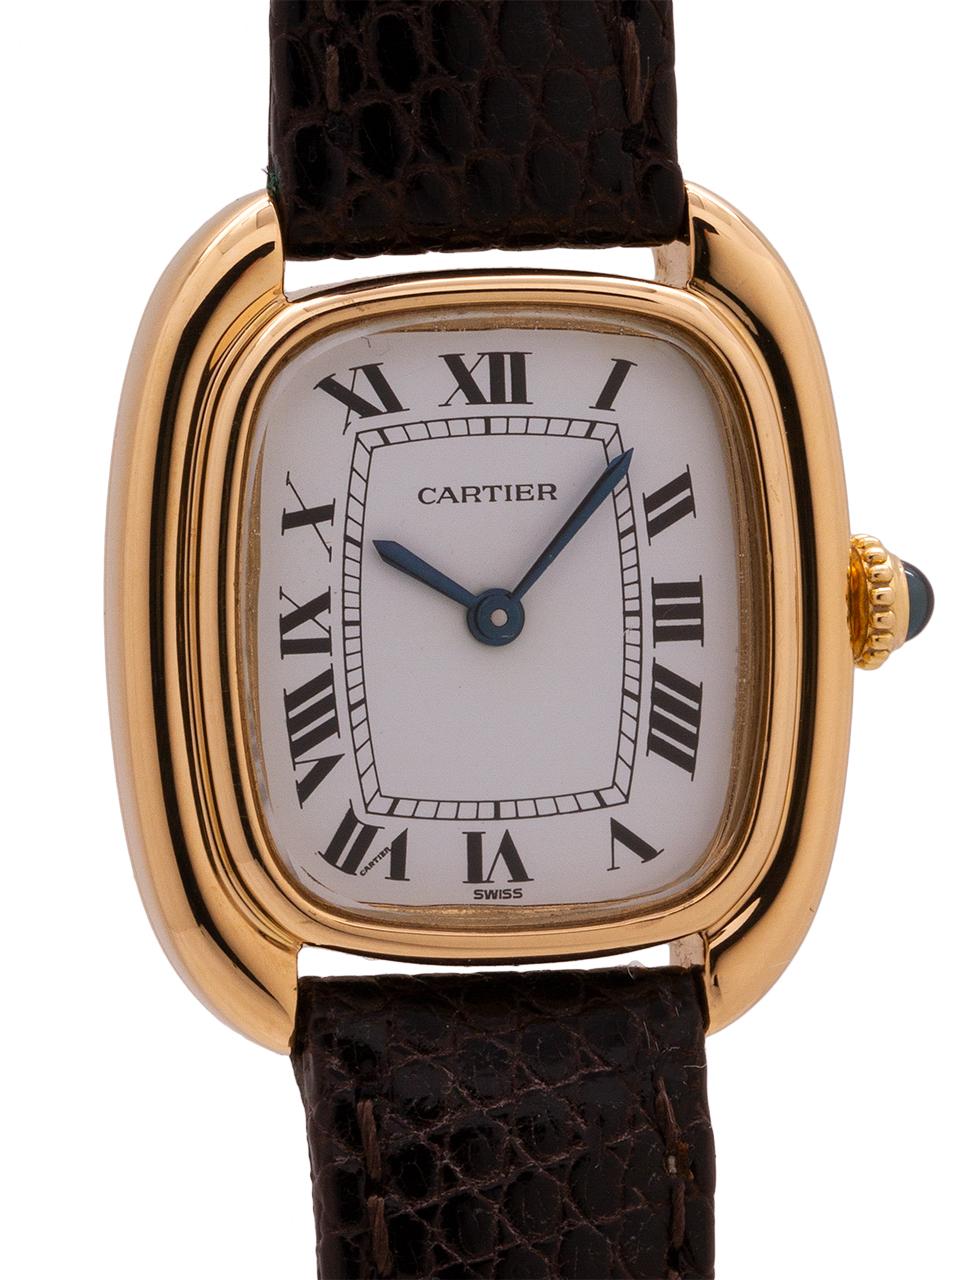 
Vintage lady Cartier Gondola model in 18K YG circa 1070’s. A beautiful lady’s watch measuring 24 X 28mm, in a elongated cushion shaped case. Featuring a pristine condition glossy white dial with Cartier “secret” signature, blued steel hands, and